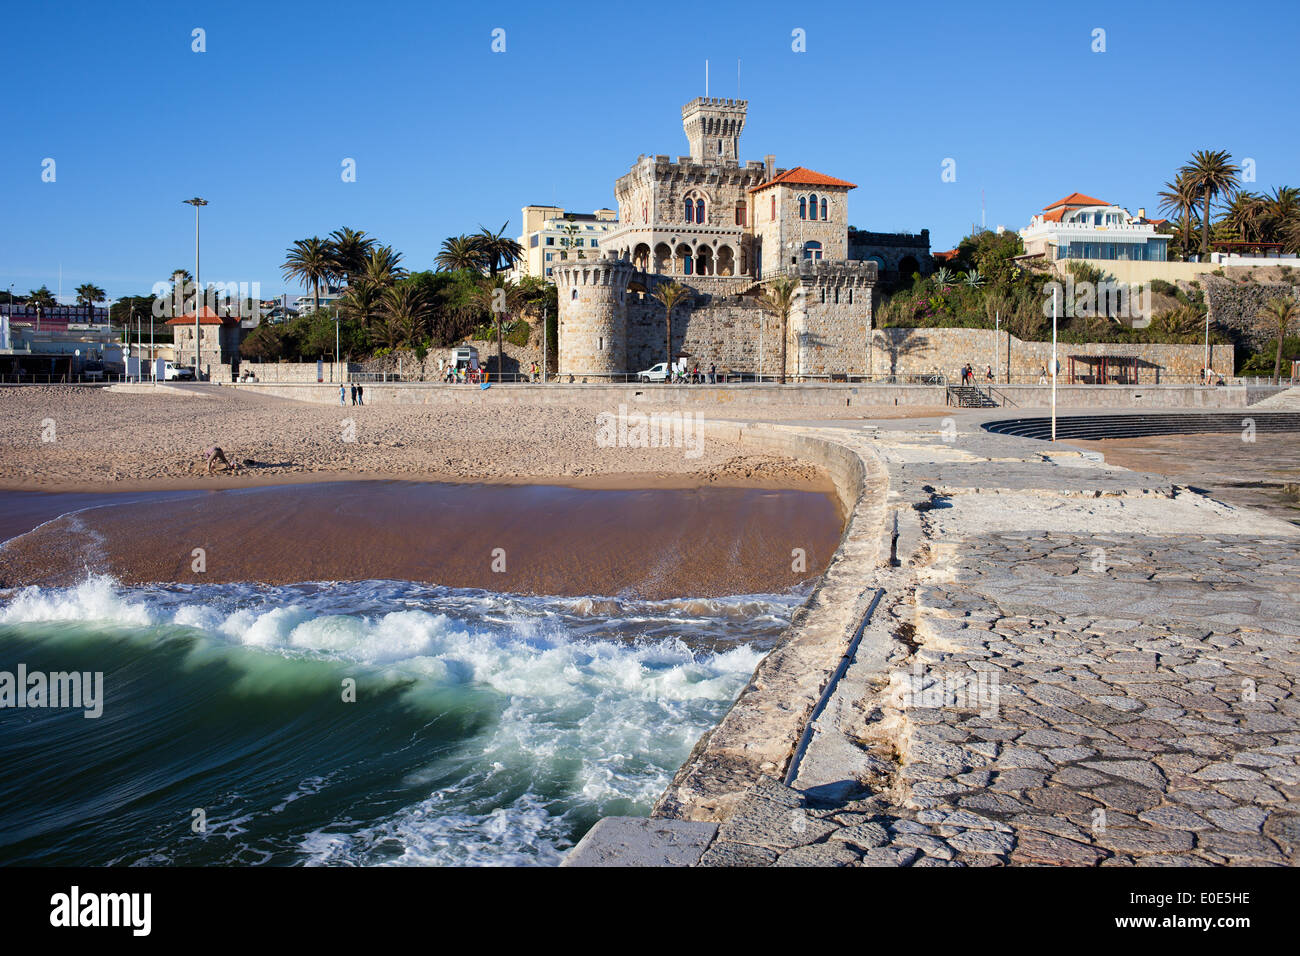 Picturesque resort town of Estoril in Portugal, castle, pier and sandy beach by the Atlantic Ocean. Stock Photo